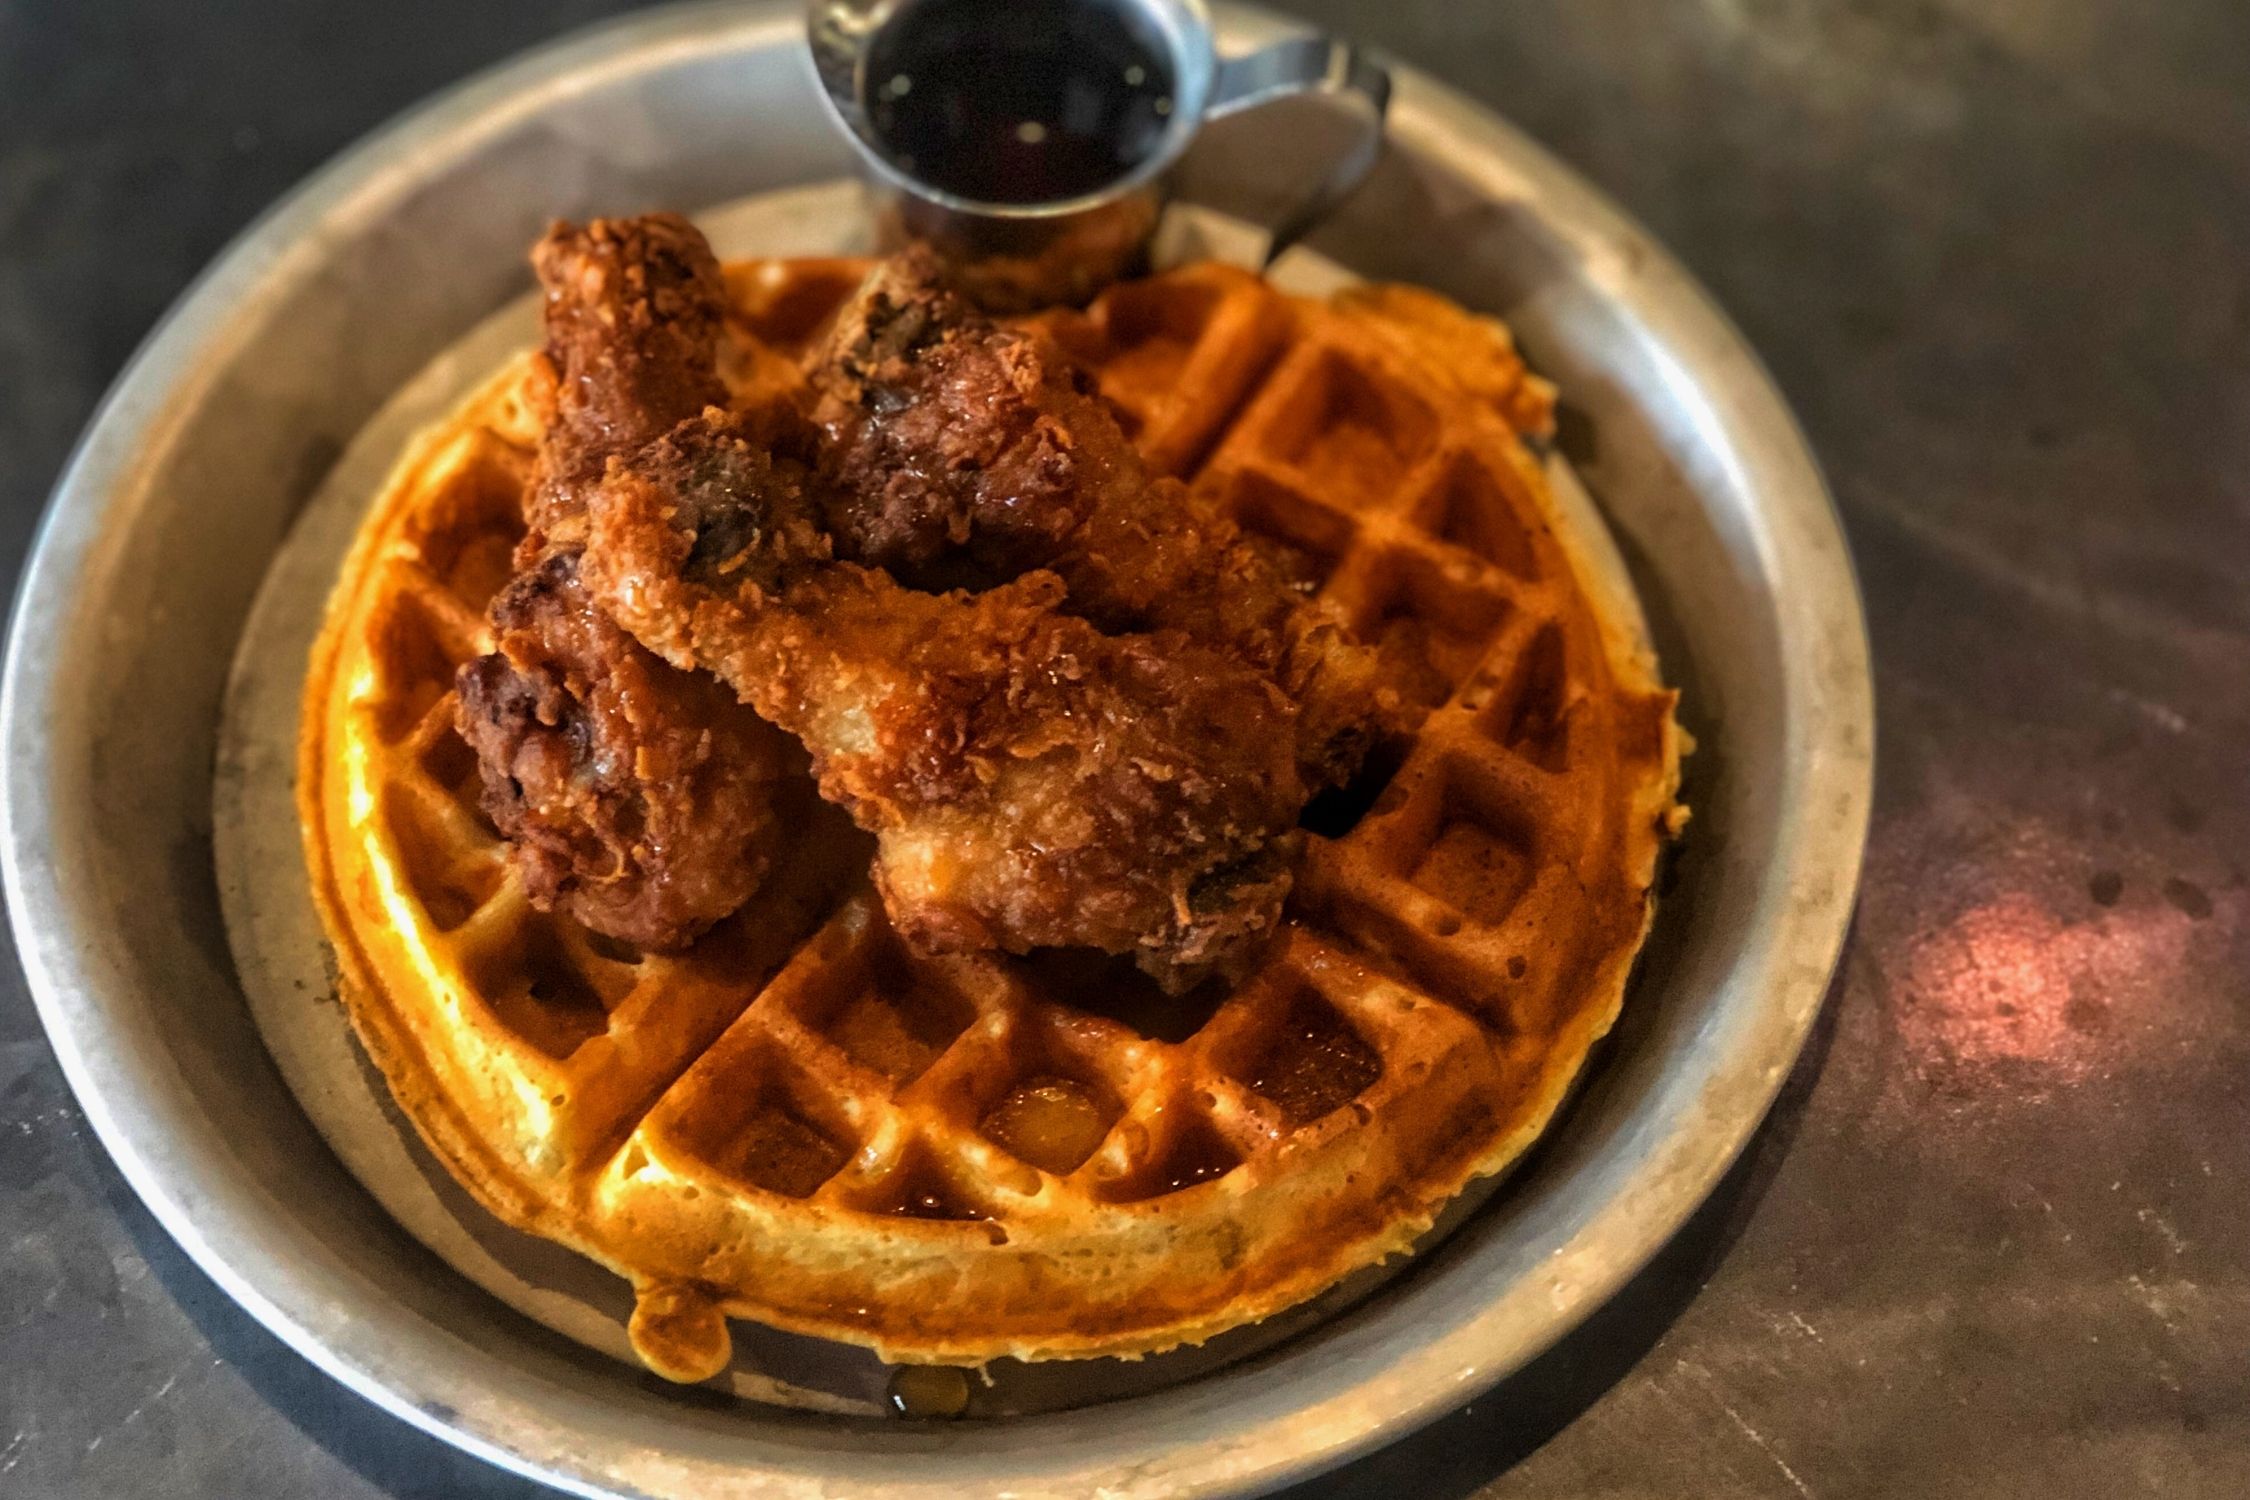 Dame’s Chicken And Waffles